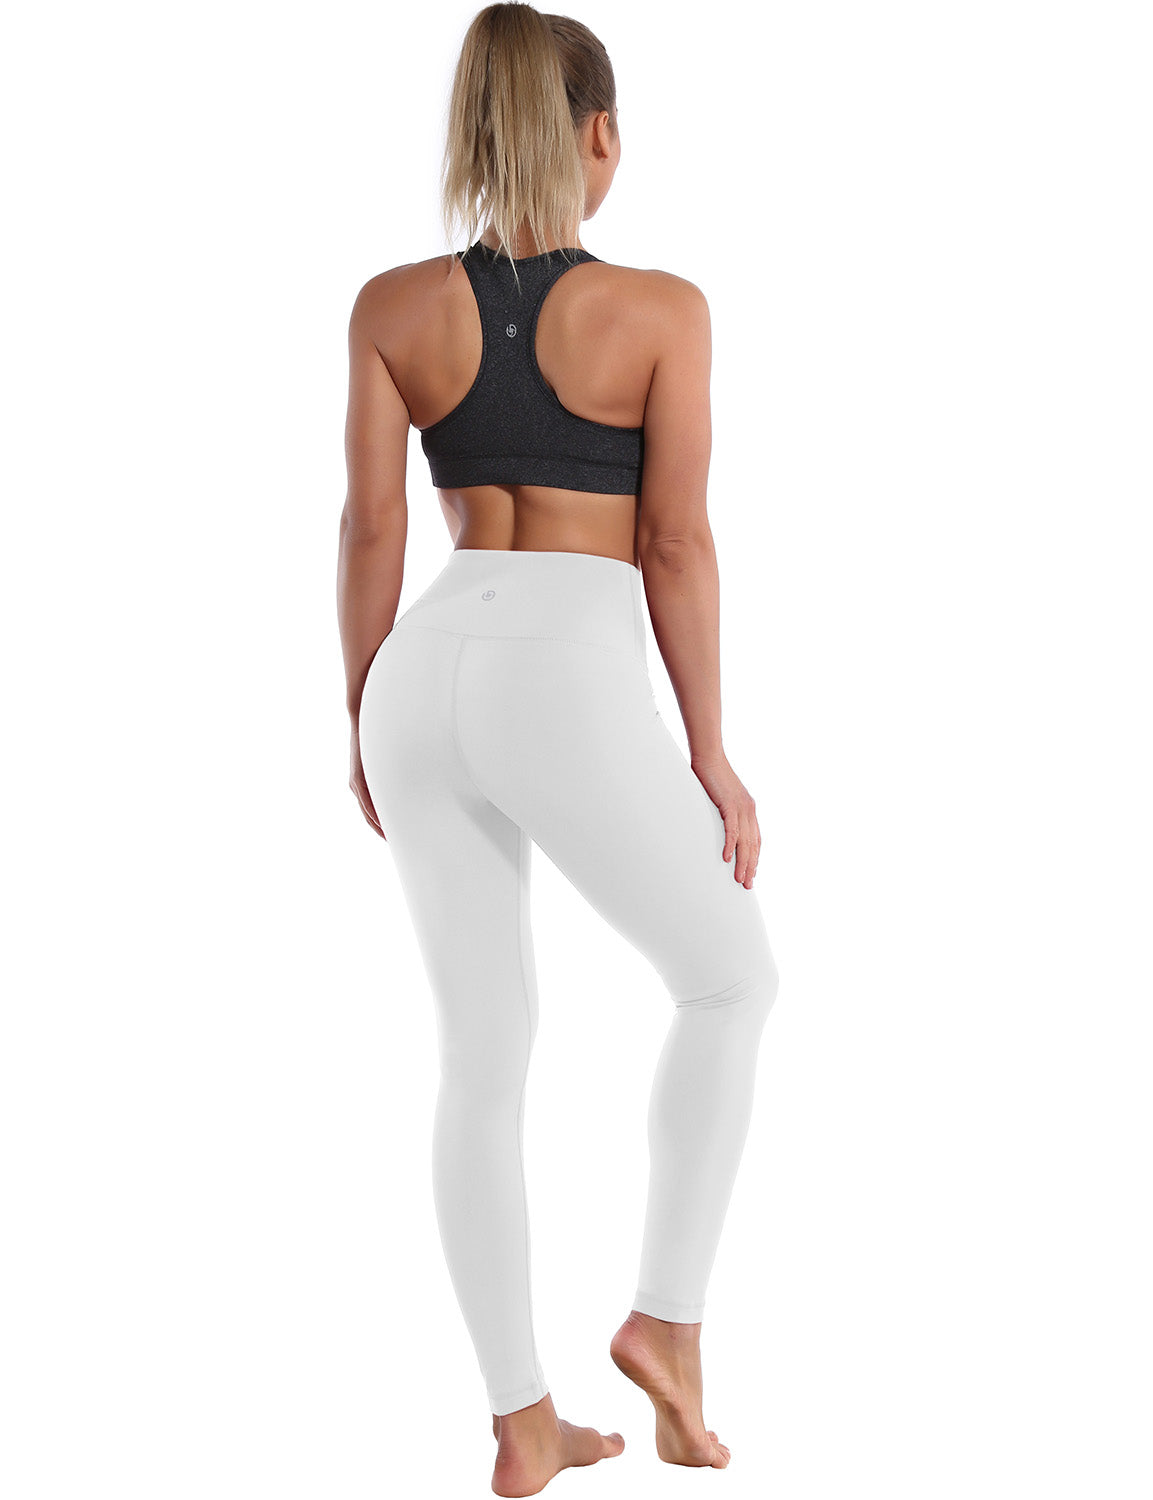 High Waist Biking Pants white 75%Nylon/25%Spandex Fabric doesn't attract lint easily 4-way stretch No see-through Moisture-wicking Tummy control Inner pocket Four lengths